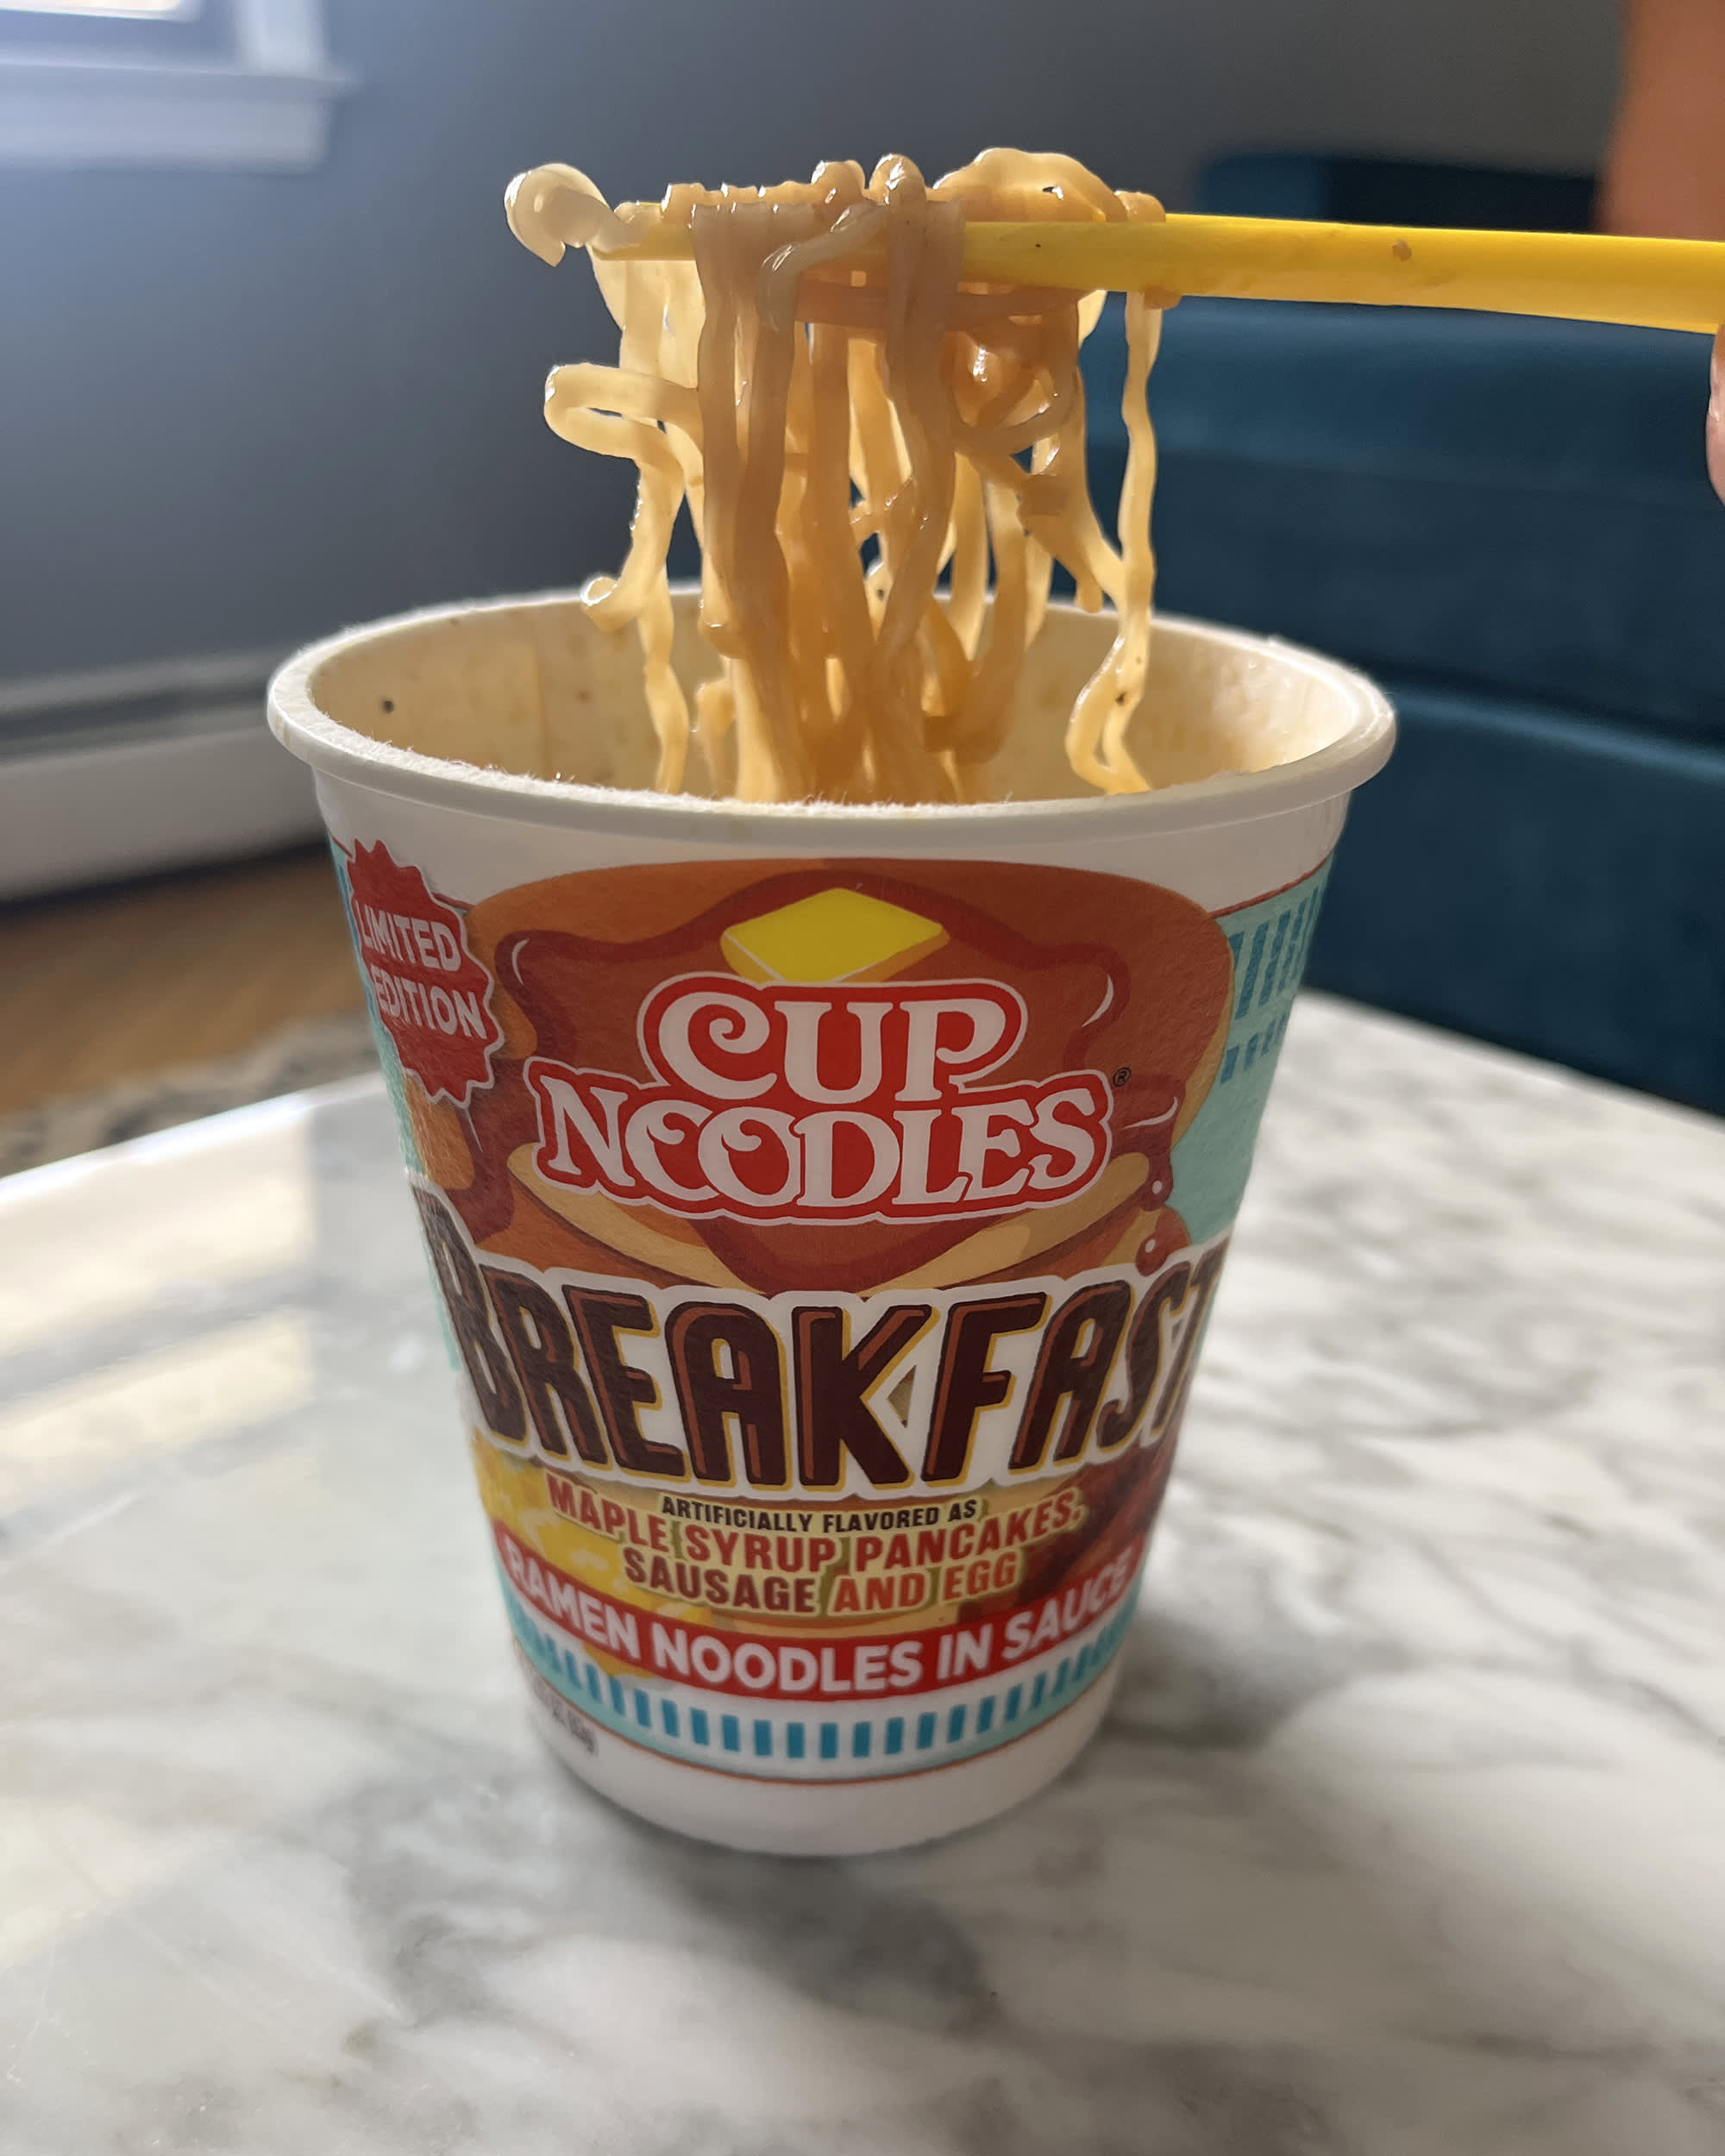 Here's Where You Can Pick Up the Breakfast-Flavored Cup Noodles